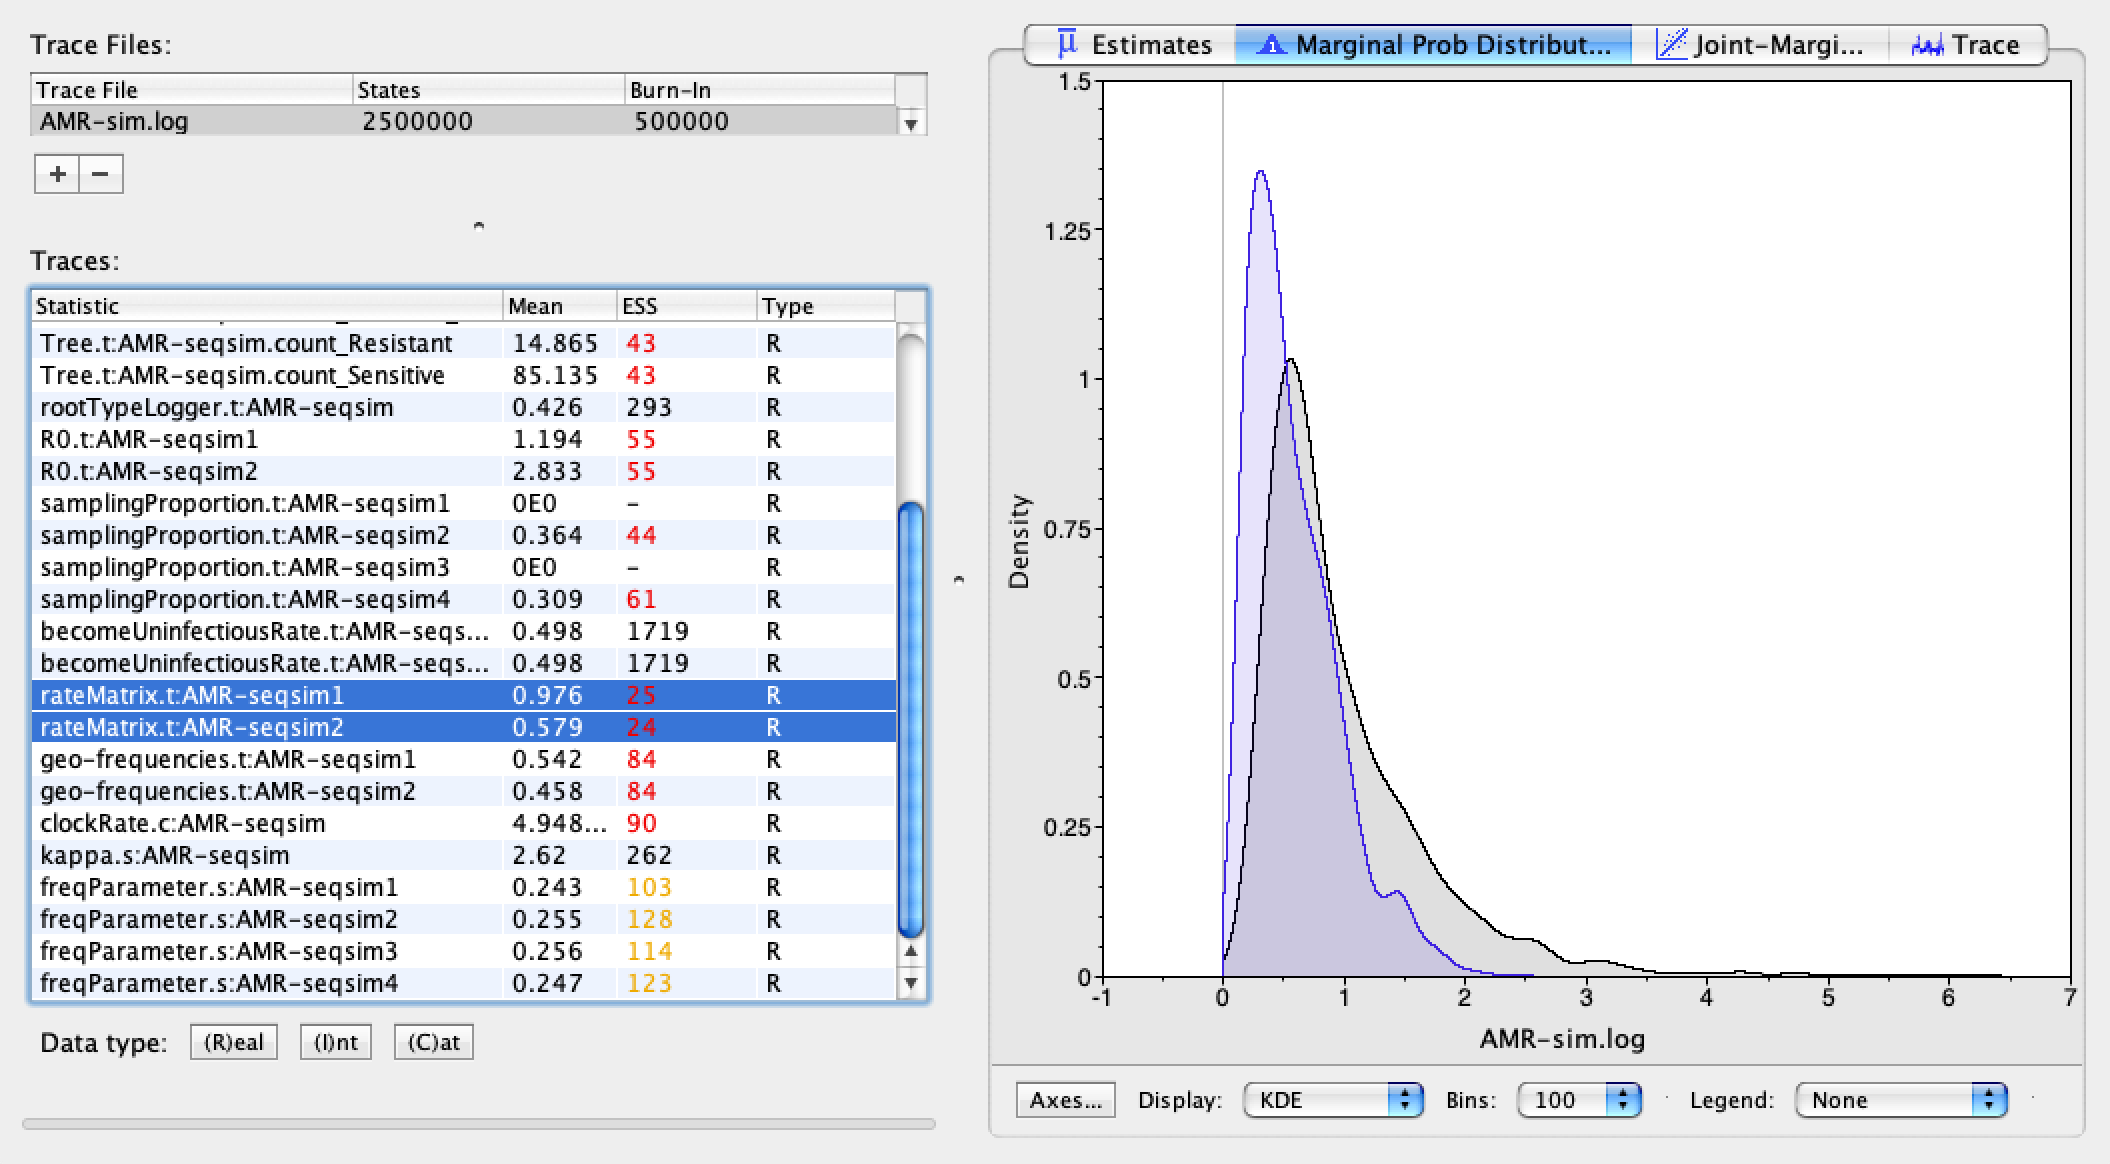 Estimated posterior distributions for the mutation rates